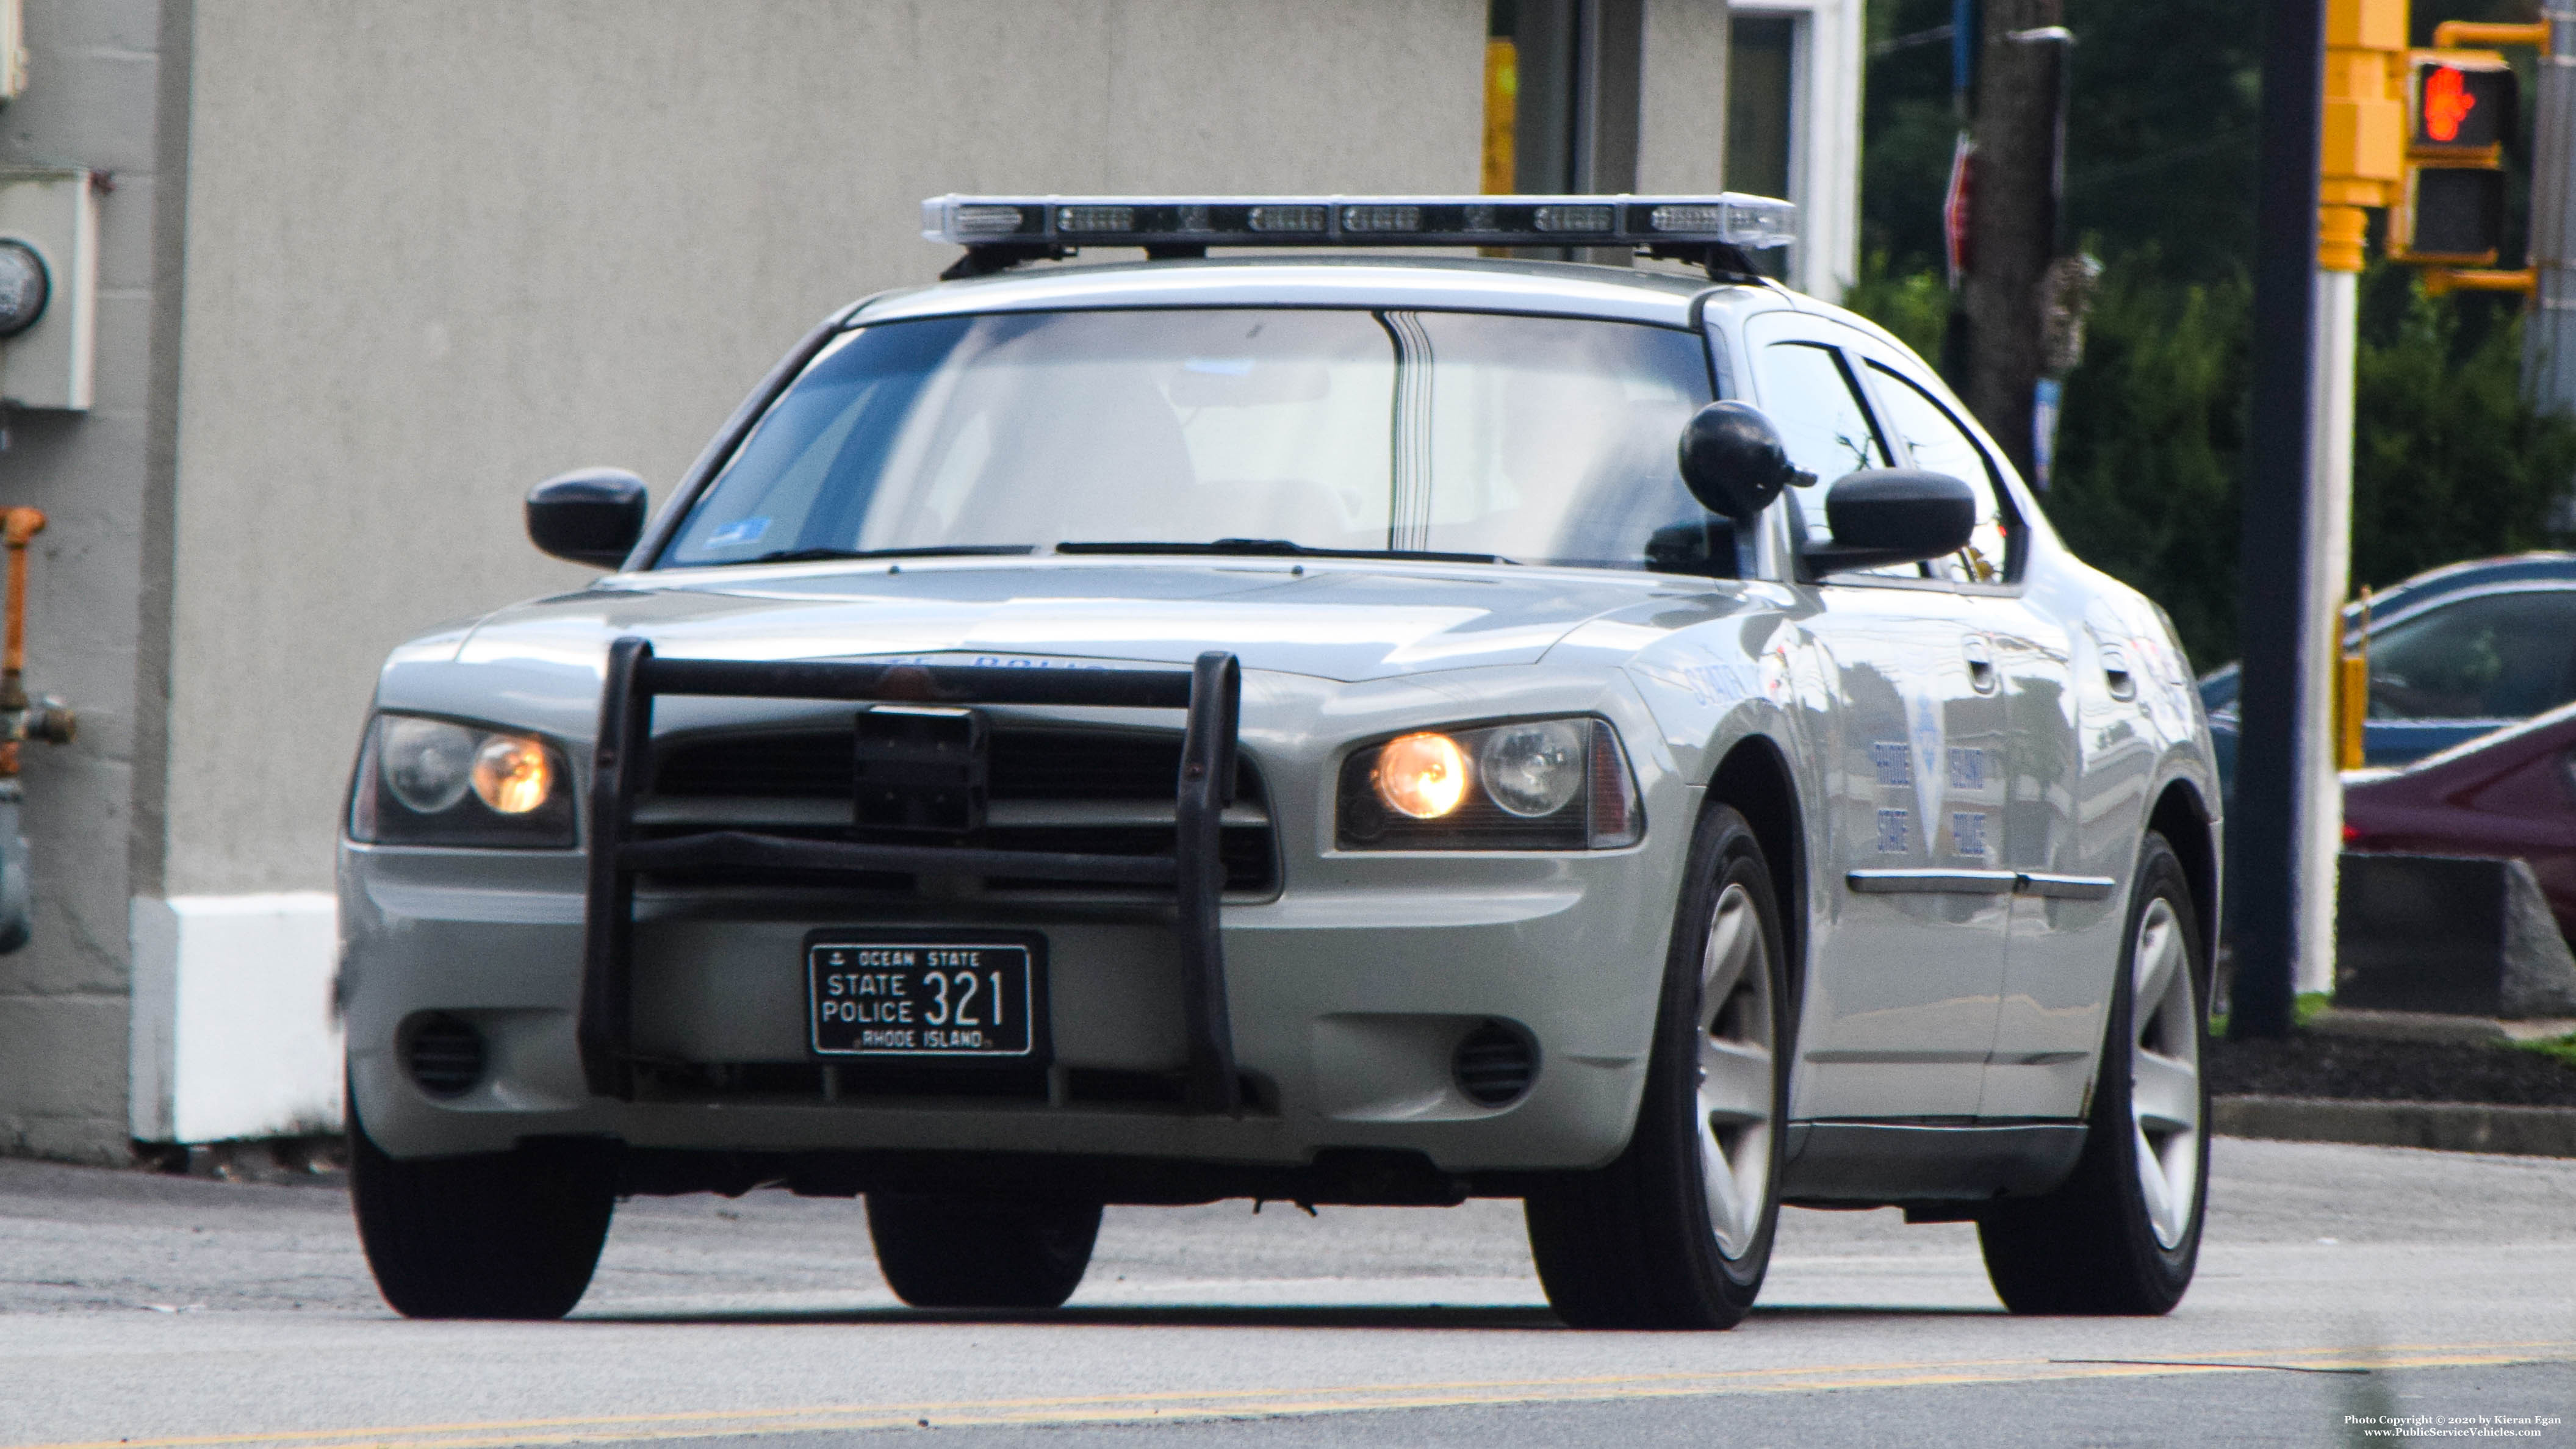 A photo  of Rhode Island State Police
            Cruiser 321, a 2006-2010 Dodge Charger             taken by Kieran Egan